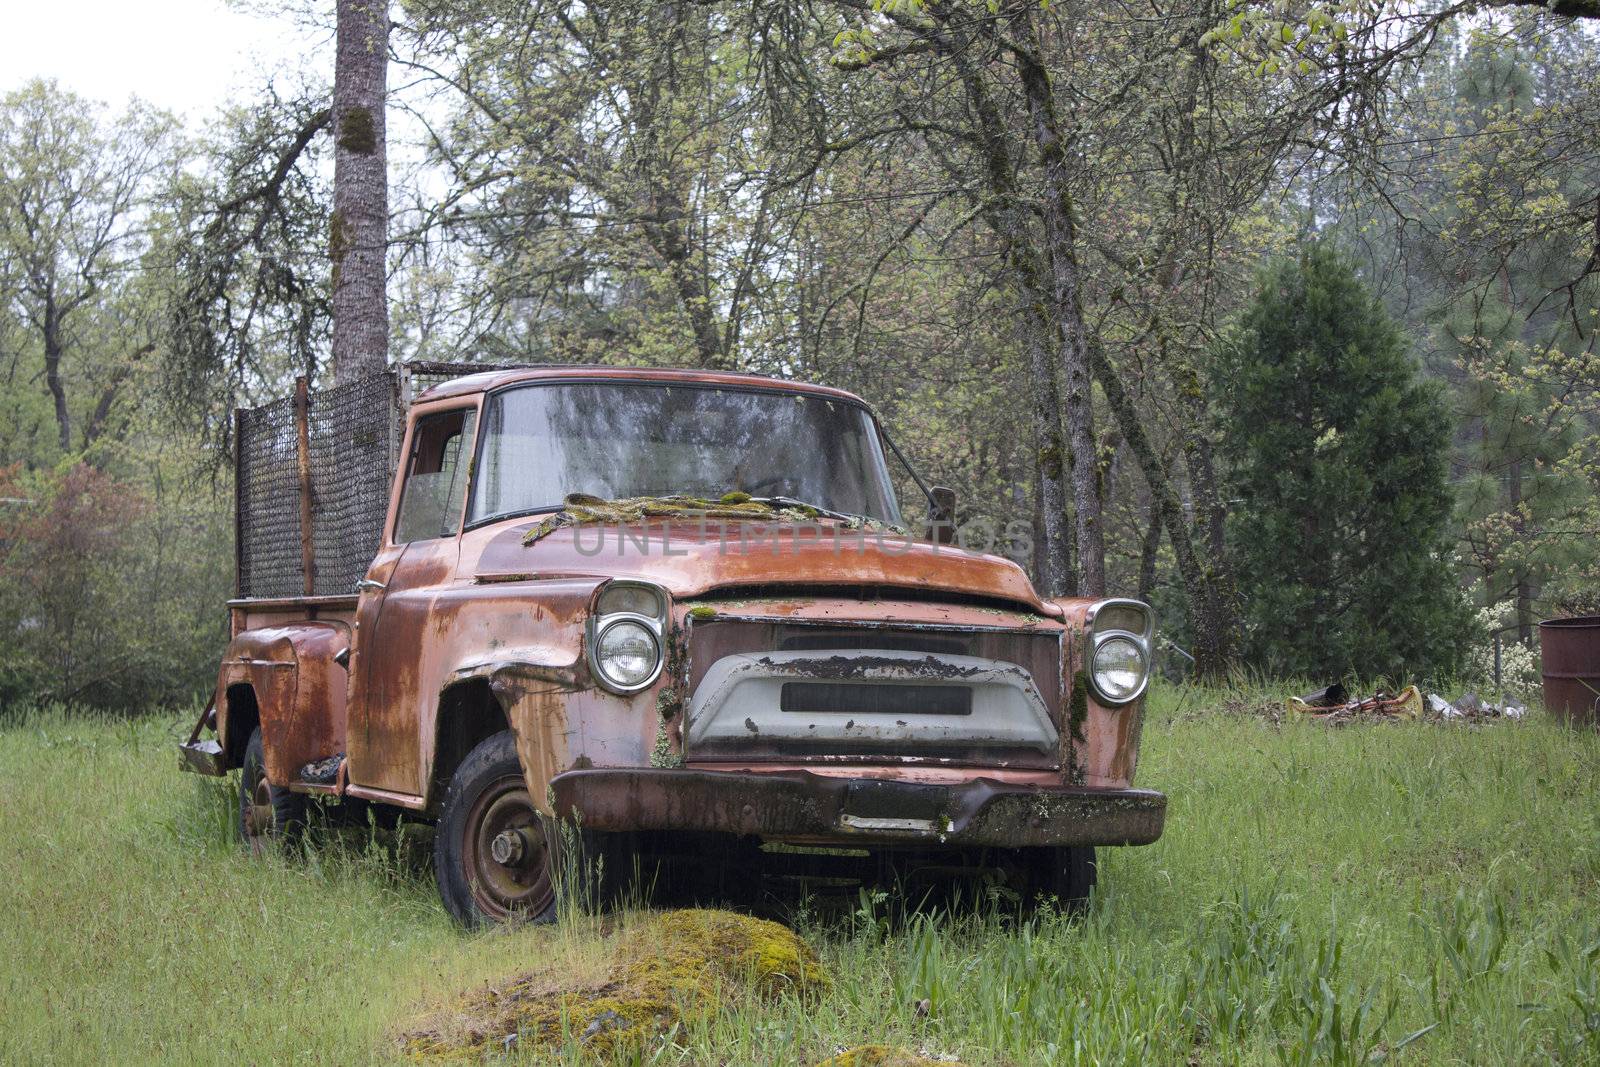 an old rusty truck in the forest during rain.